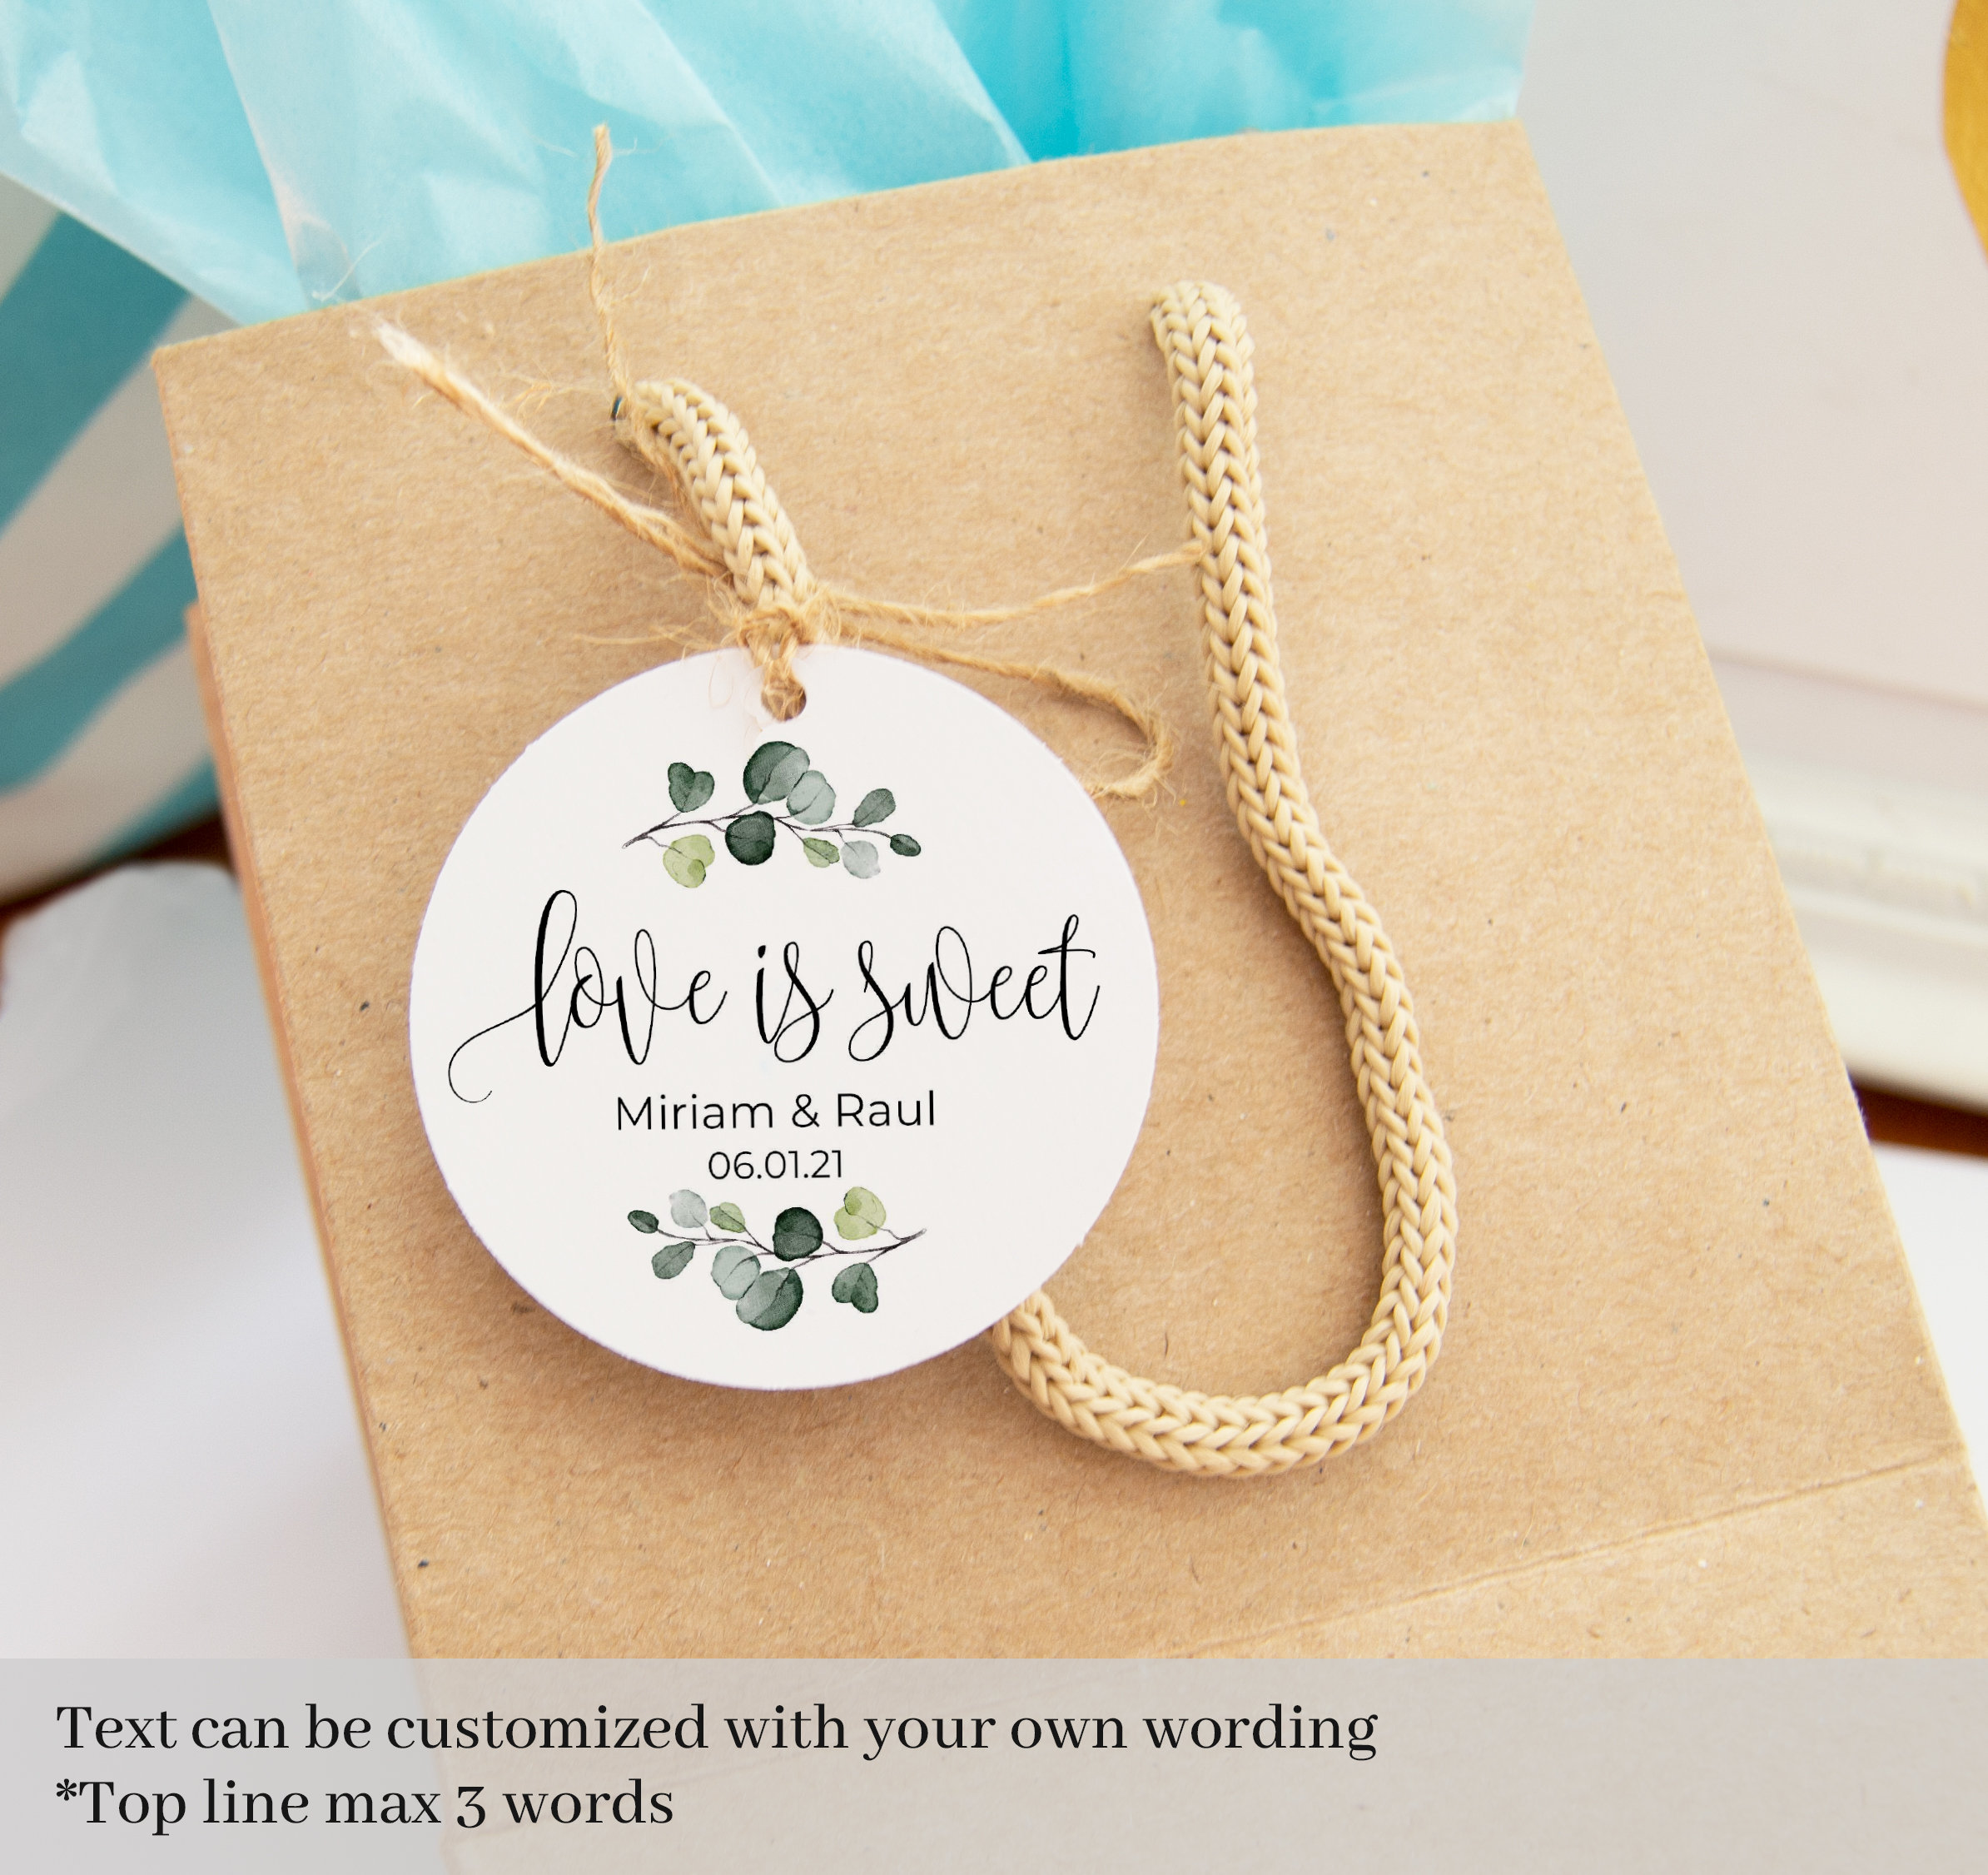 Personalized Made with Love Wedding Favors Square Gift Tags –